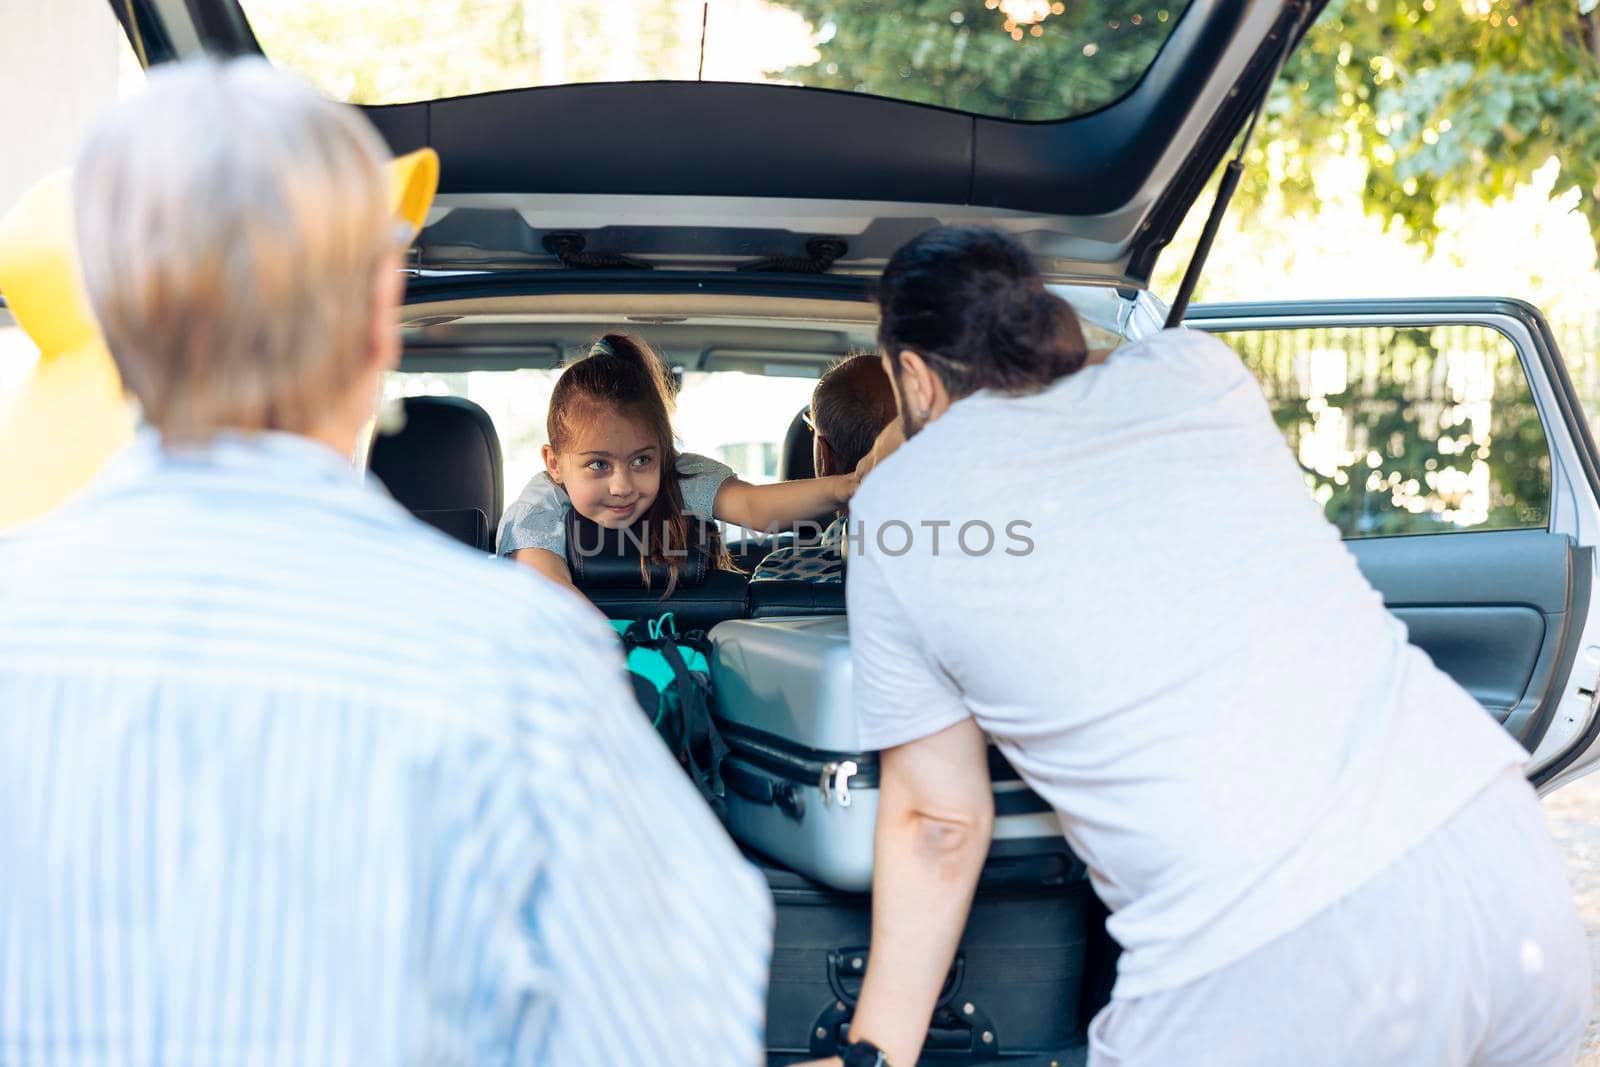 Young kid in vehicle leaving on vacation with parents and grandparents, loading travel bags in trunk of automobile. Big happy family travelling on road trip holiday to go to seaside destination.